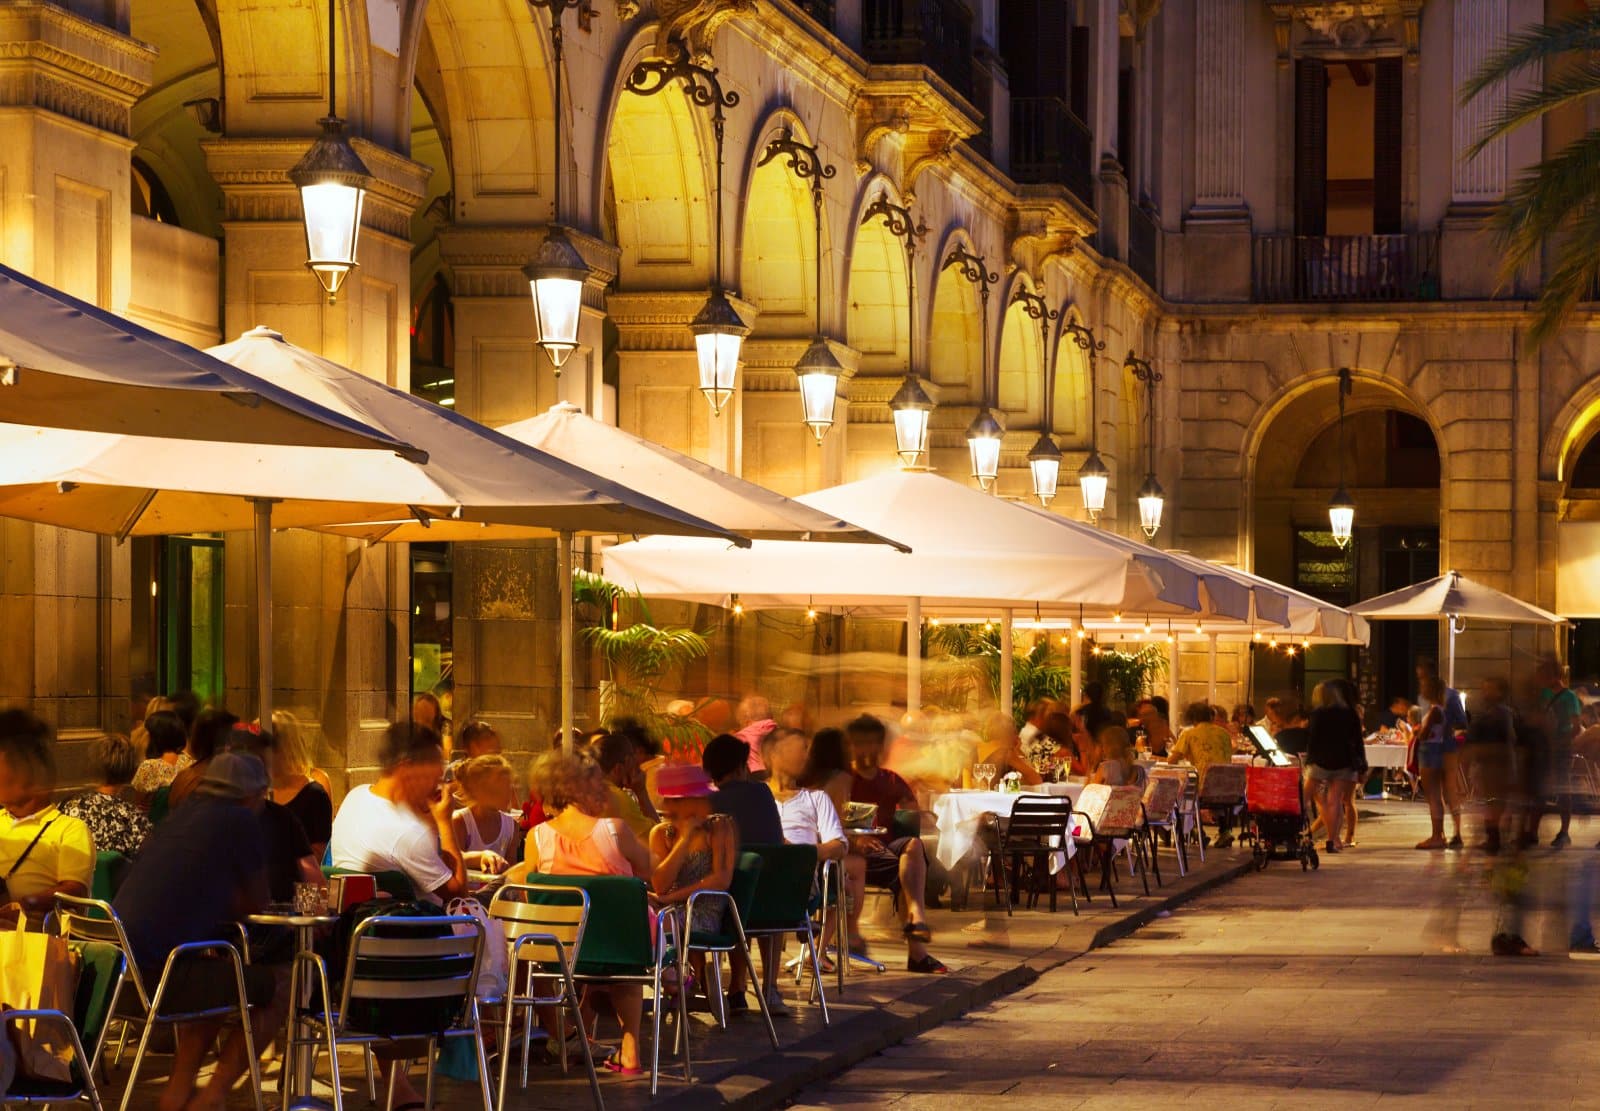 <p class="wp-caption-text">Image Credit: Shutterstock / BearFotos</p>  <p><span>Away from the tourist trails, the Sants district offers an authentic slice of Barcelona life, reflected in its food. This residential neighborhood is filled with local eateries, bakeries, and bars where traditional Catalan cuisine takes center stage. You can enjoy home-style meals, artisanal pastries, and tapas in a more relaxed and genuinely local atmosphere. Dining in Sants allows visitors to experience the everyday culinary culture of Barcelona, from breakfast churros and chocolate to leisurely lunches and lively dinner scenes.</span></p>